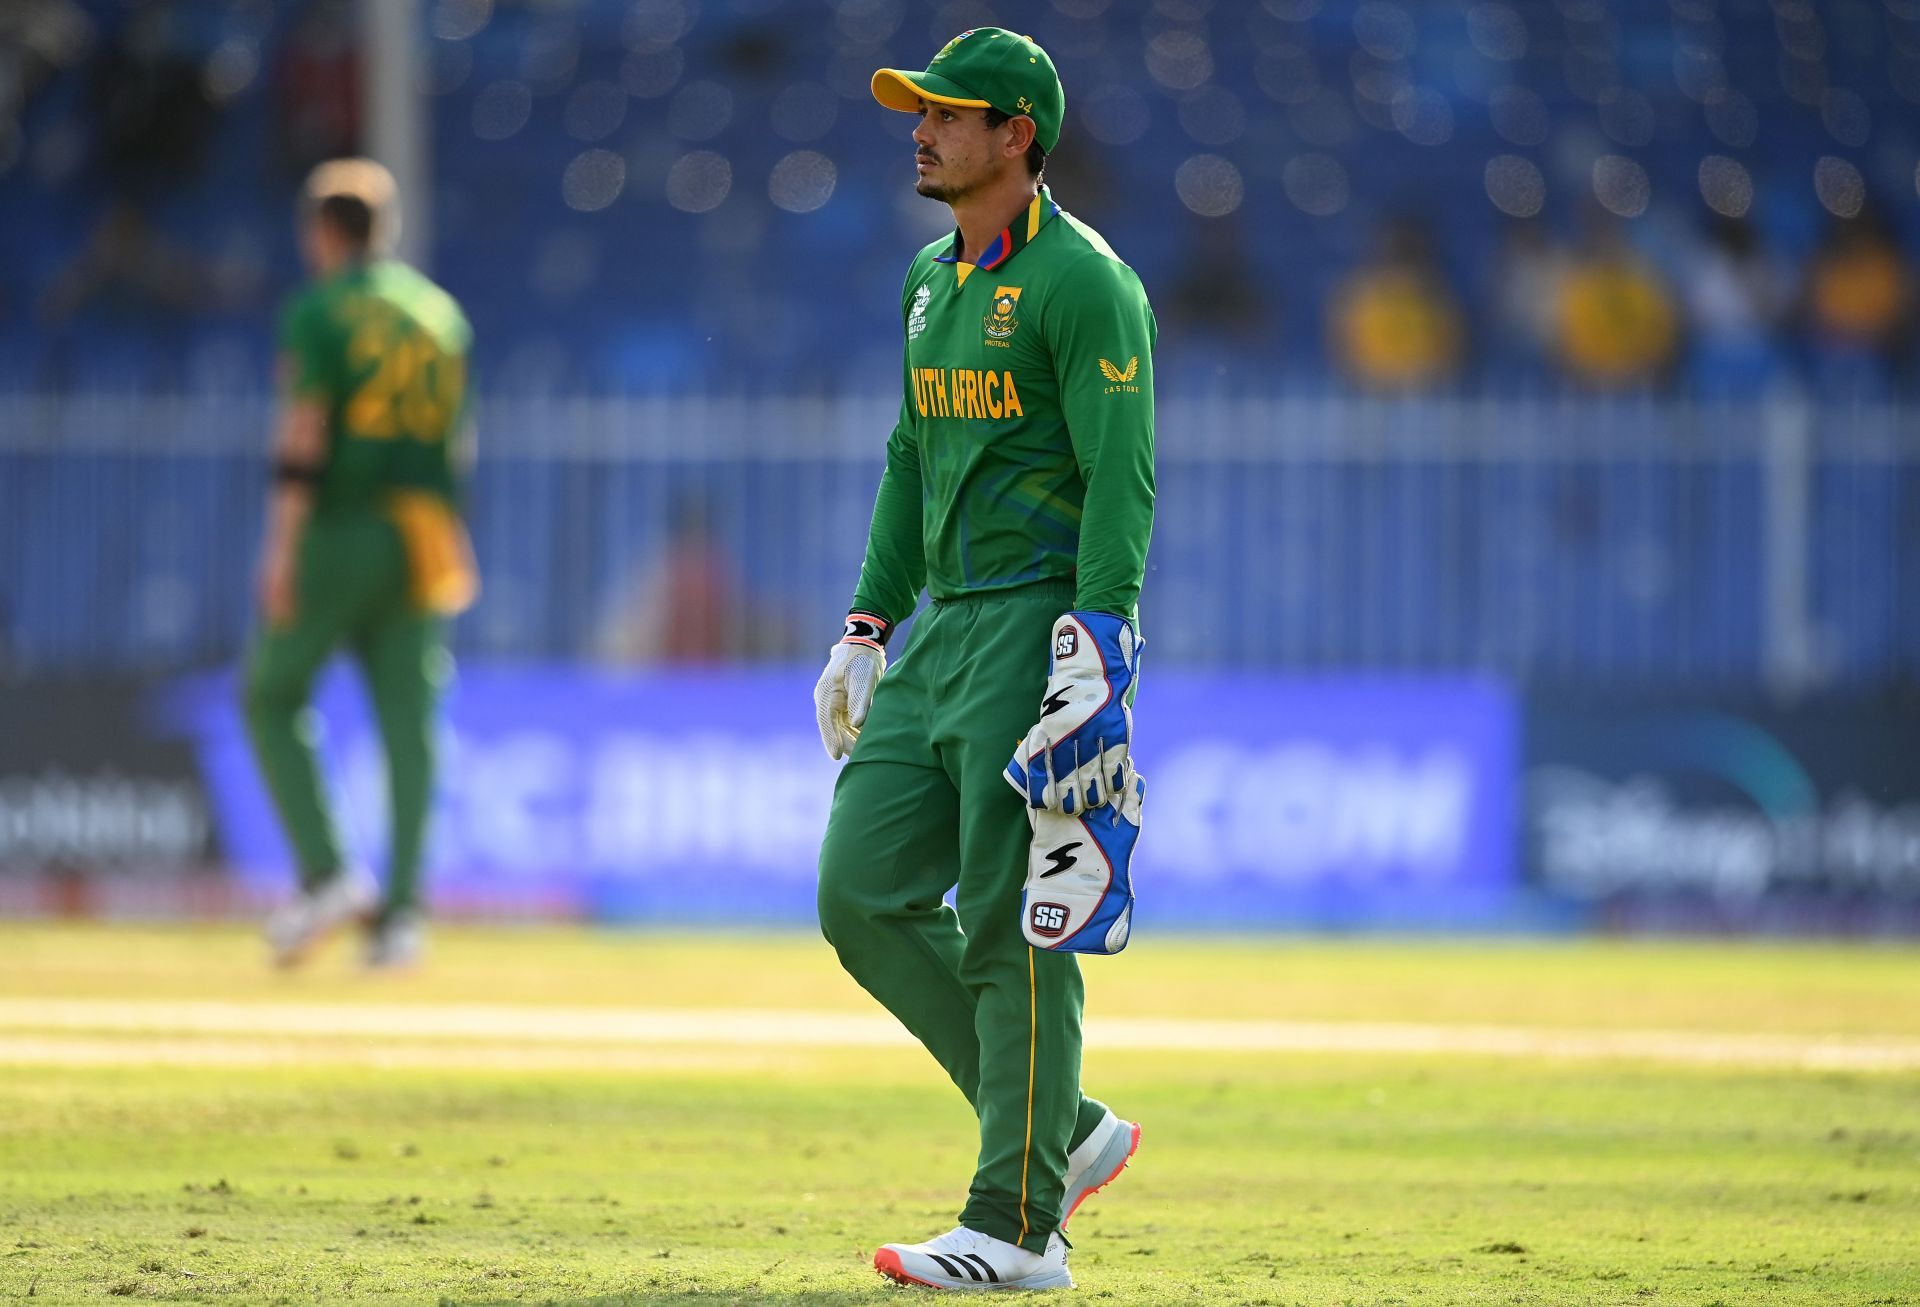 Quinton de Kock will be returning to international cricket in the Proteas colors.